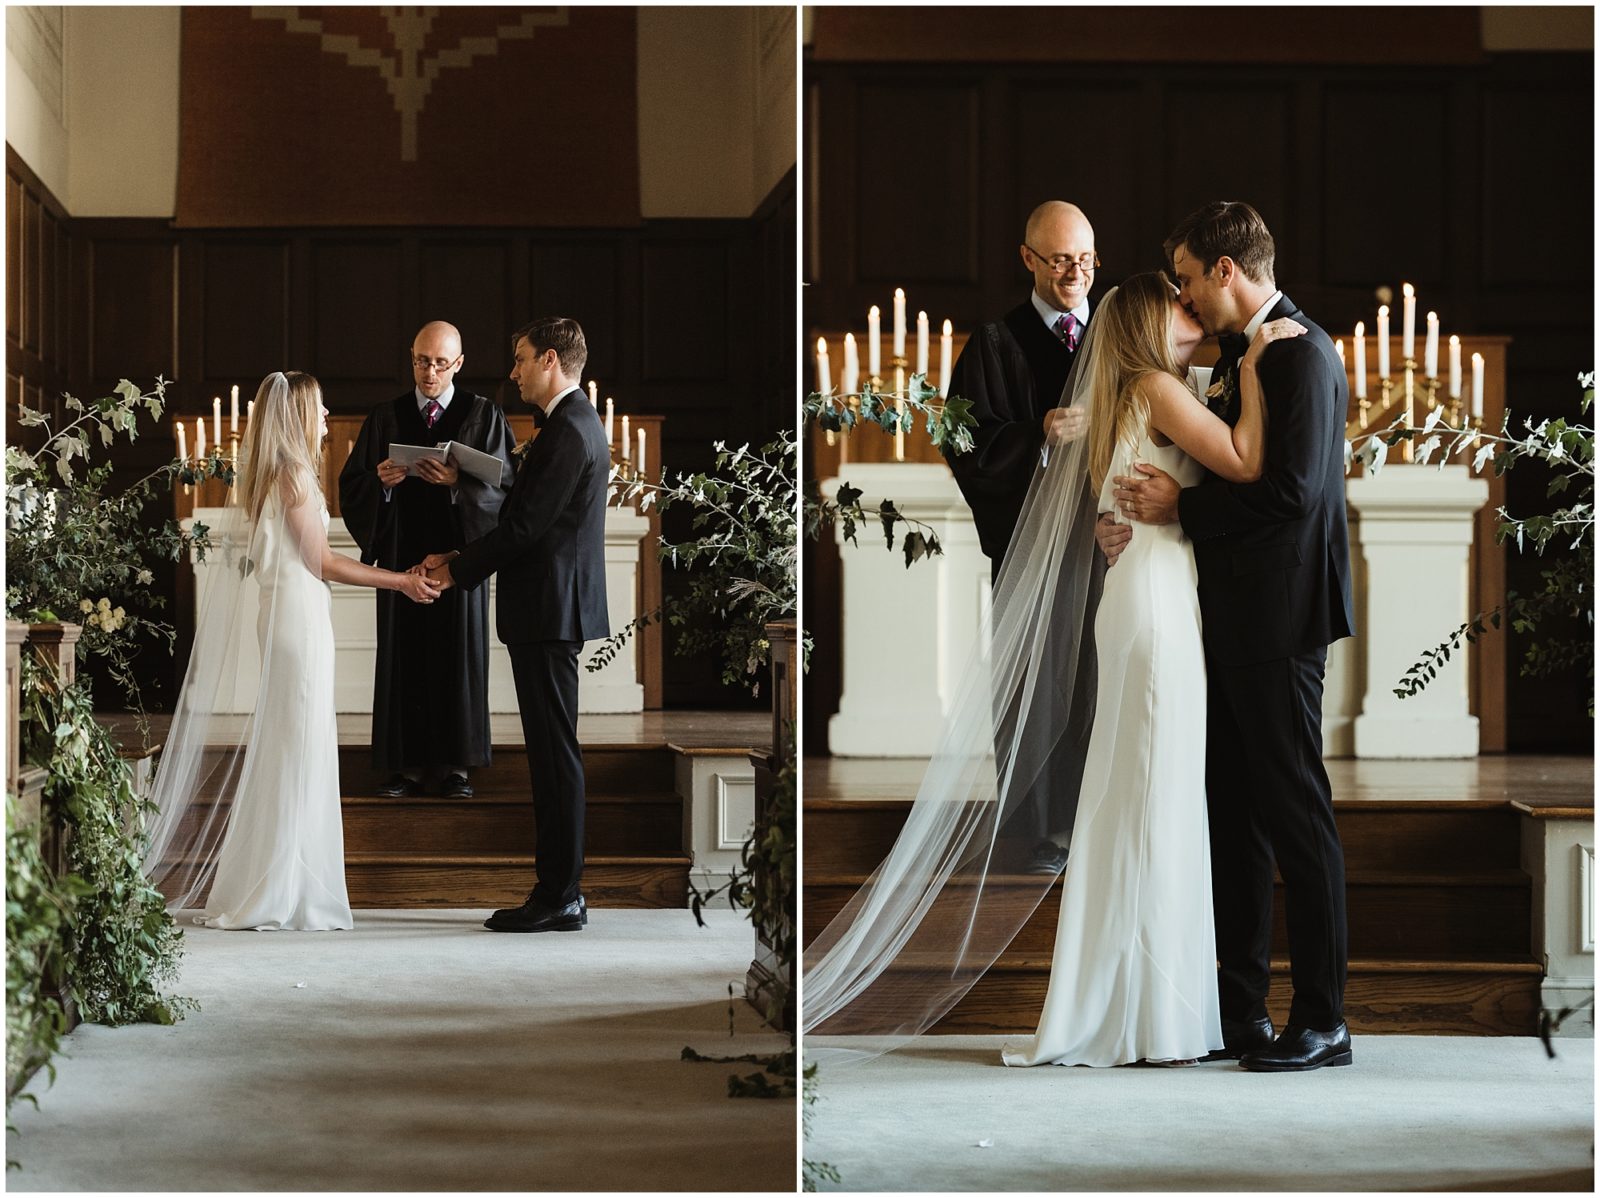 First kiss of modern and stylish wedding ceremony in Portland, Oregon.